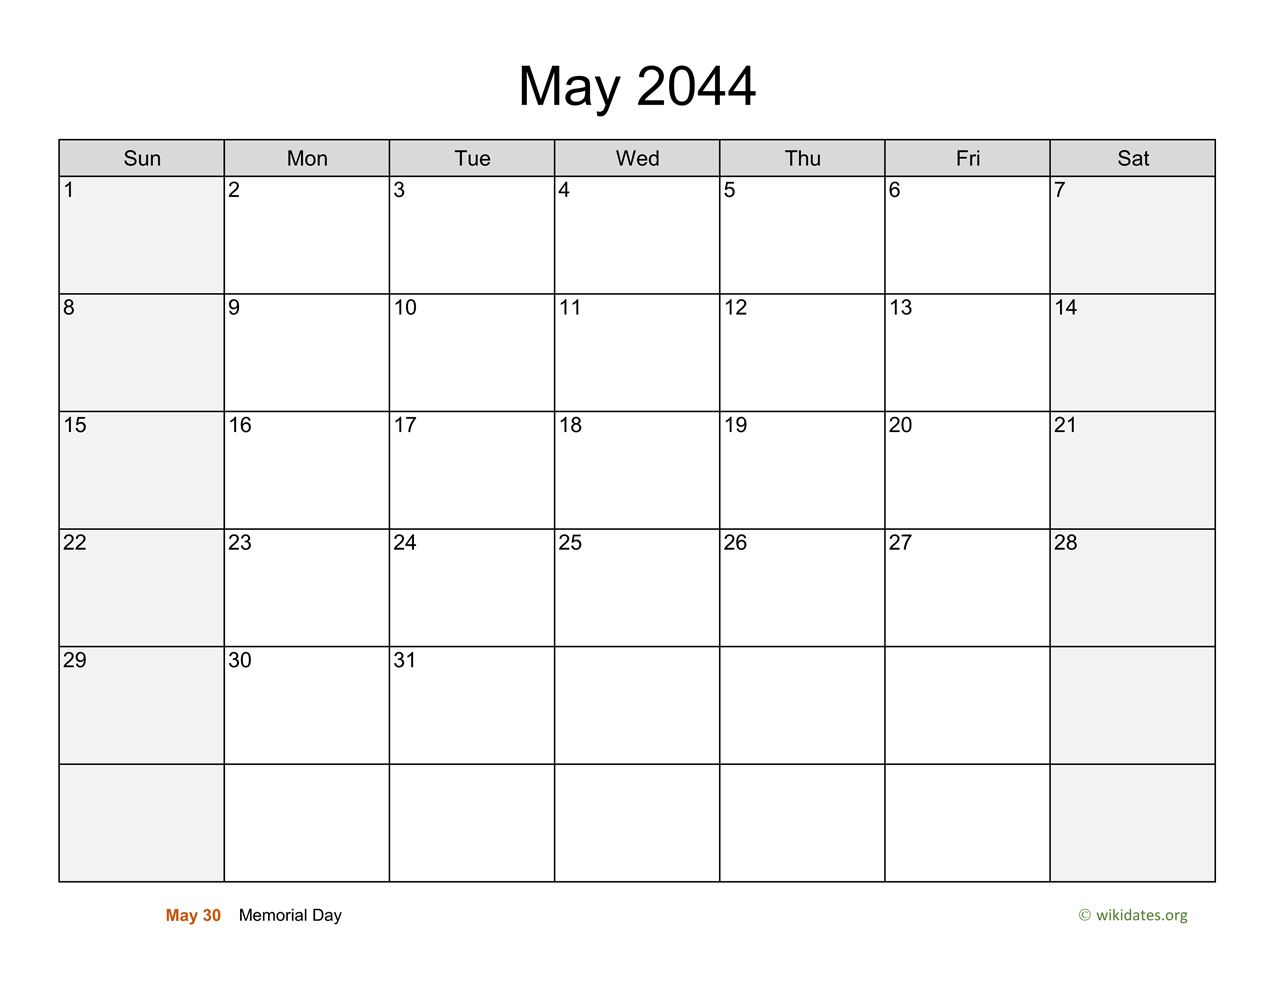 May 2044 Calendar with Weekend Shaded | WikiDates.org